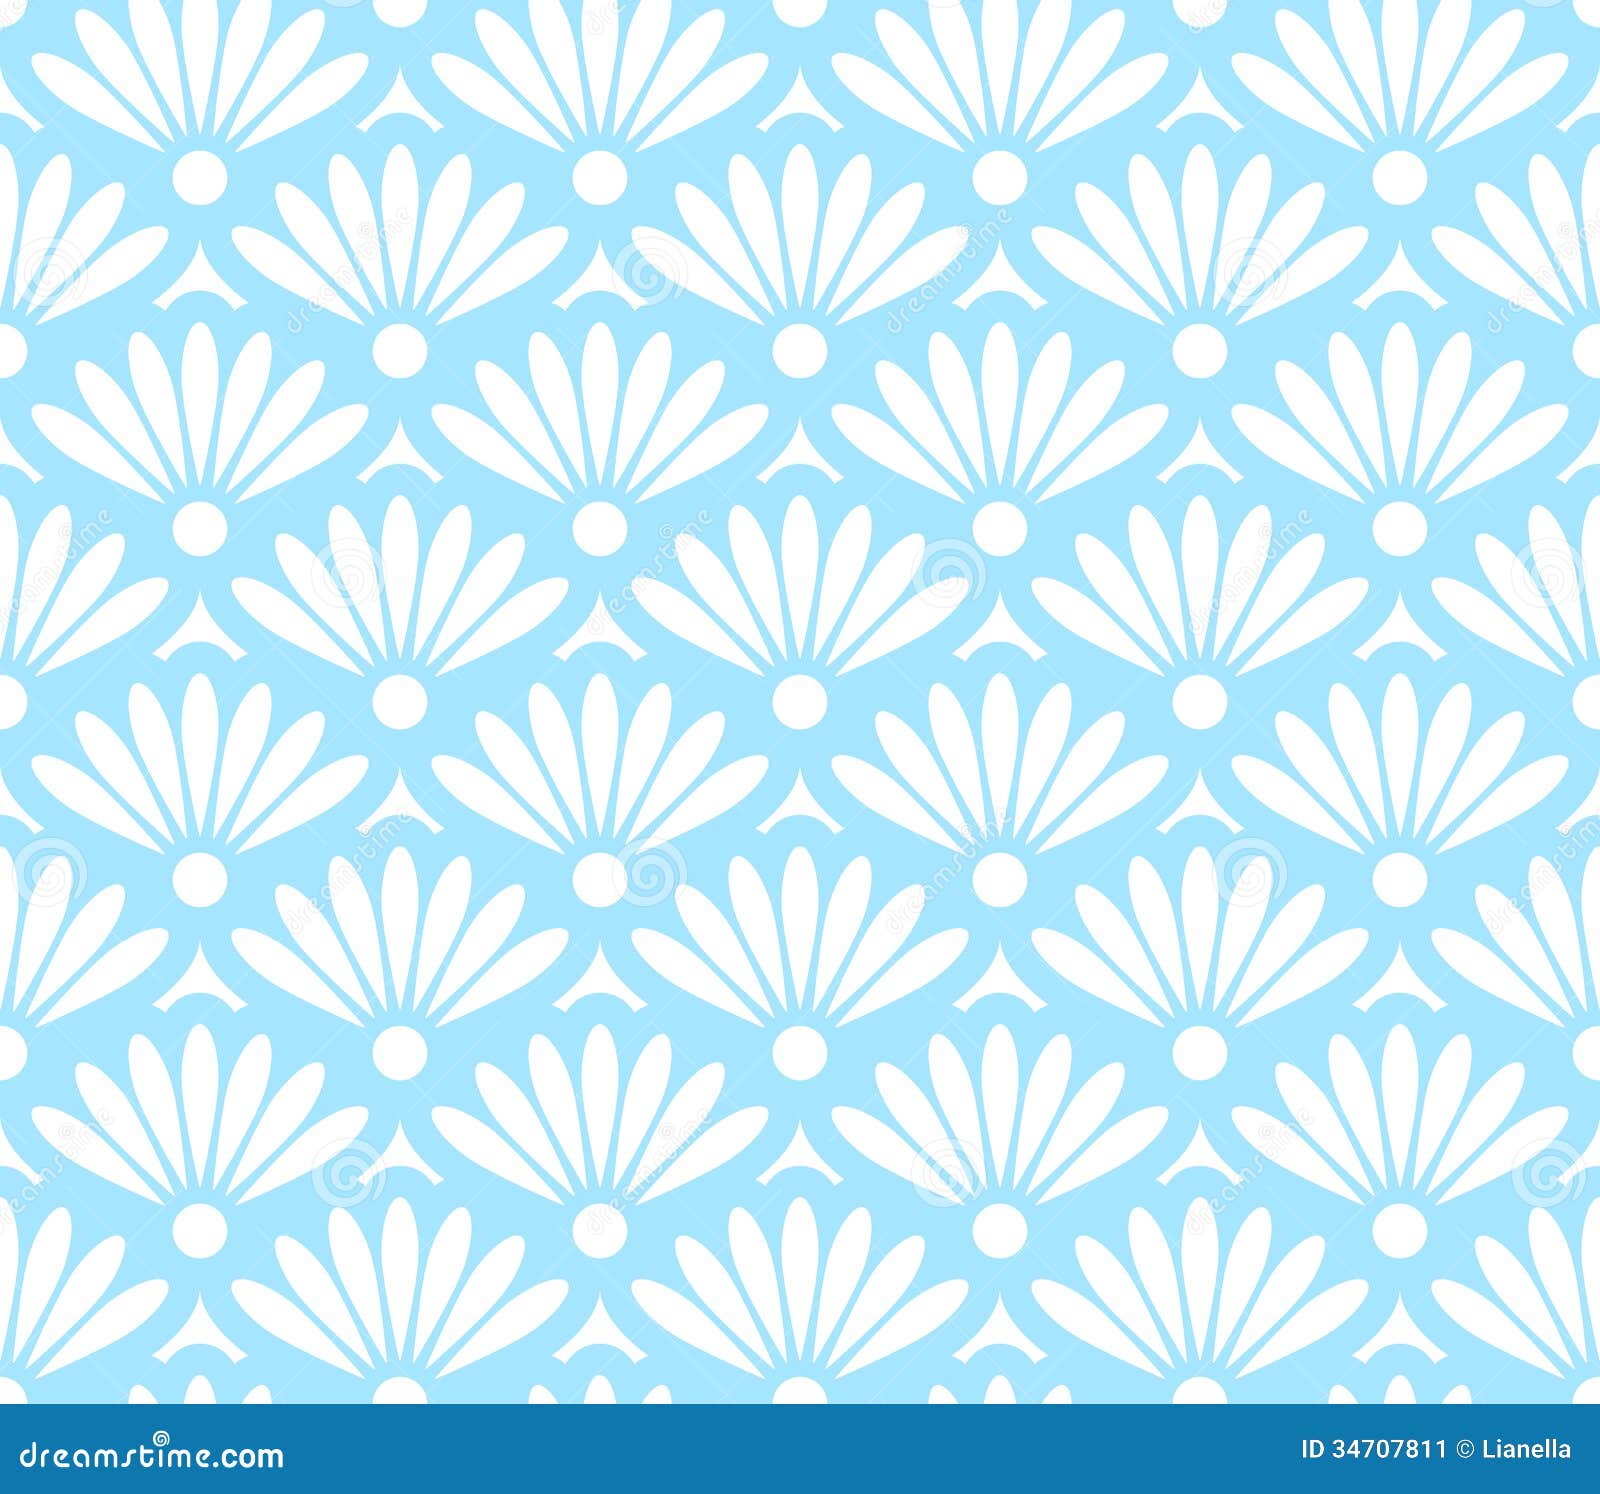 dots backgrounds tumblr Pattern Blue White Stock Seamless  And Image: 34707811 Image